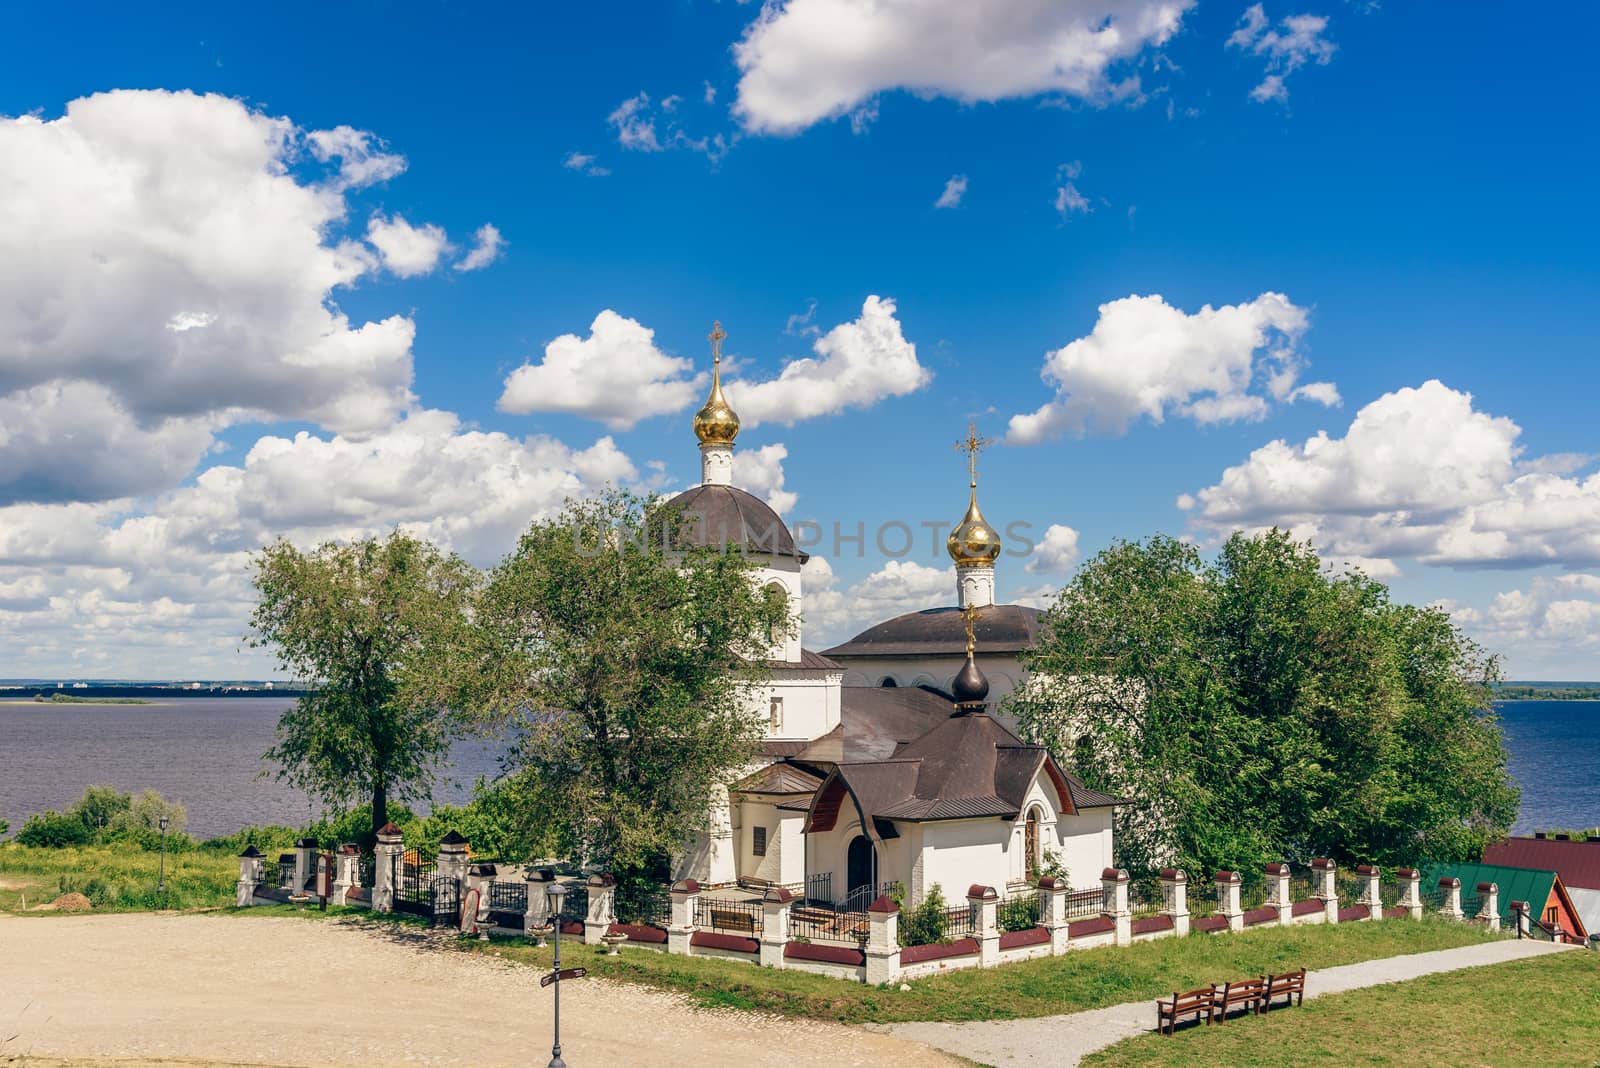 Church of St Constantine and Helena on rural island Sviyazhsk in Russia. Summer Day with Cloudy Sky.